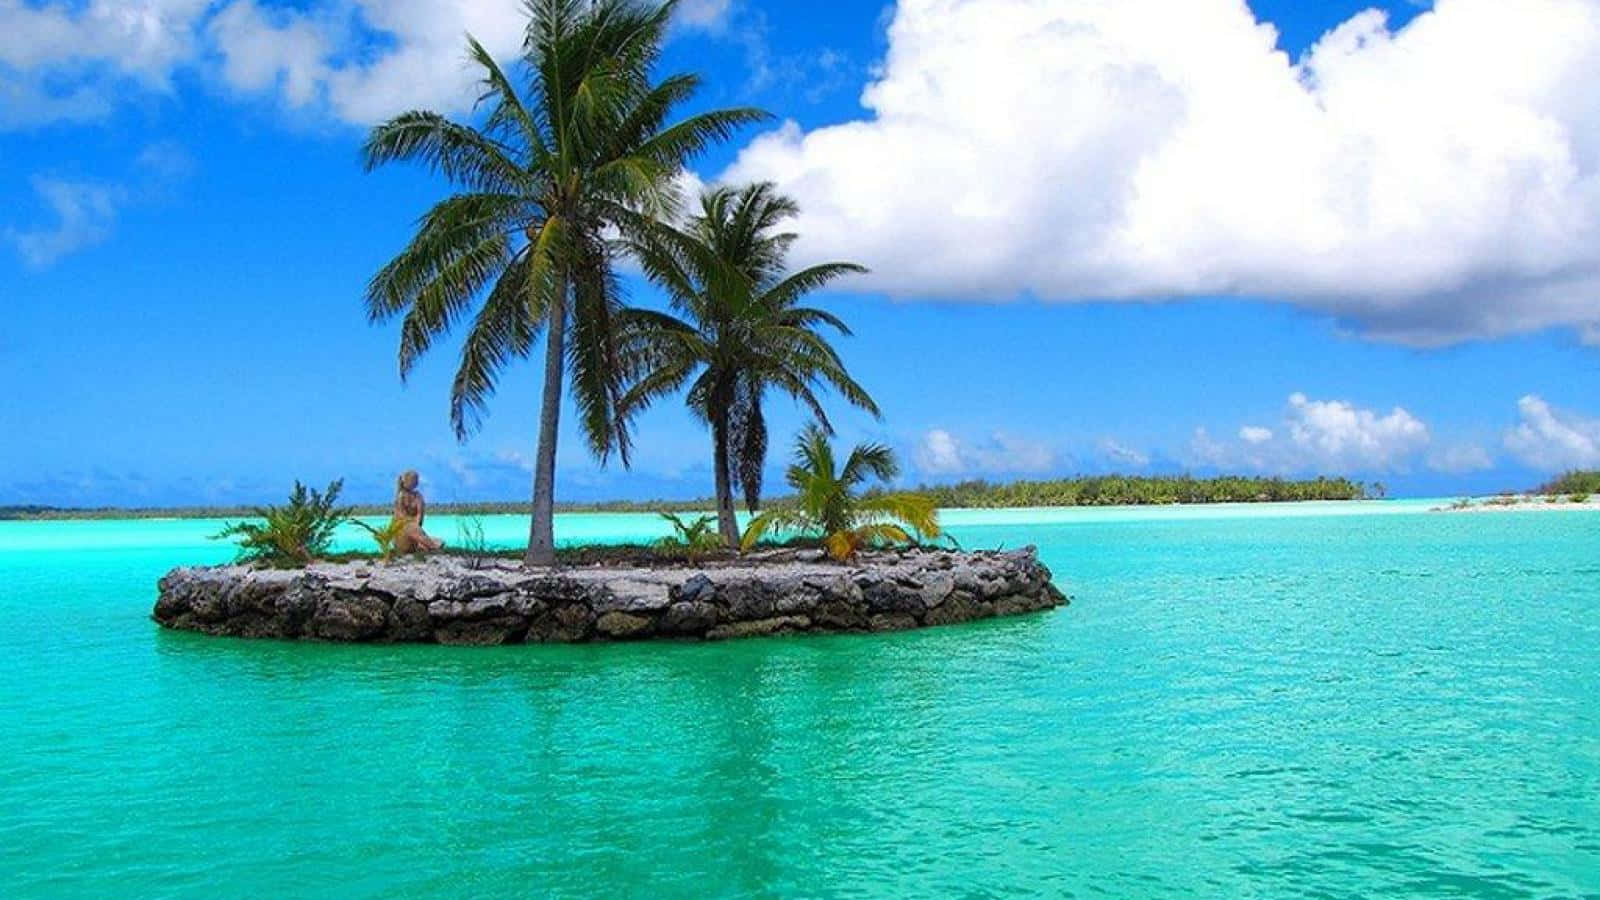 A Palm Tree Sits On An Island In The Ocean